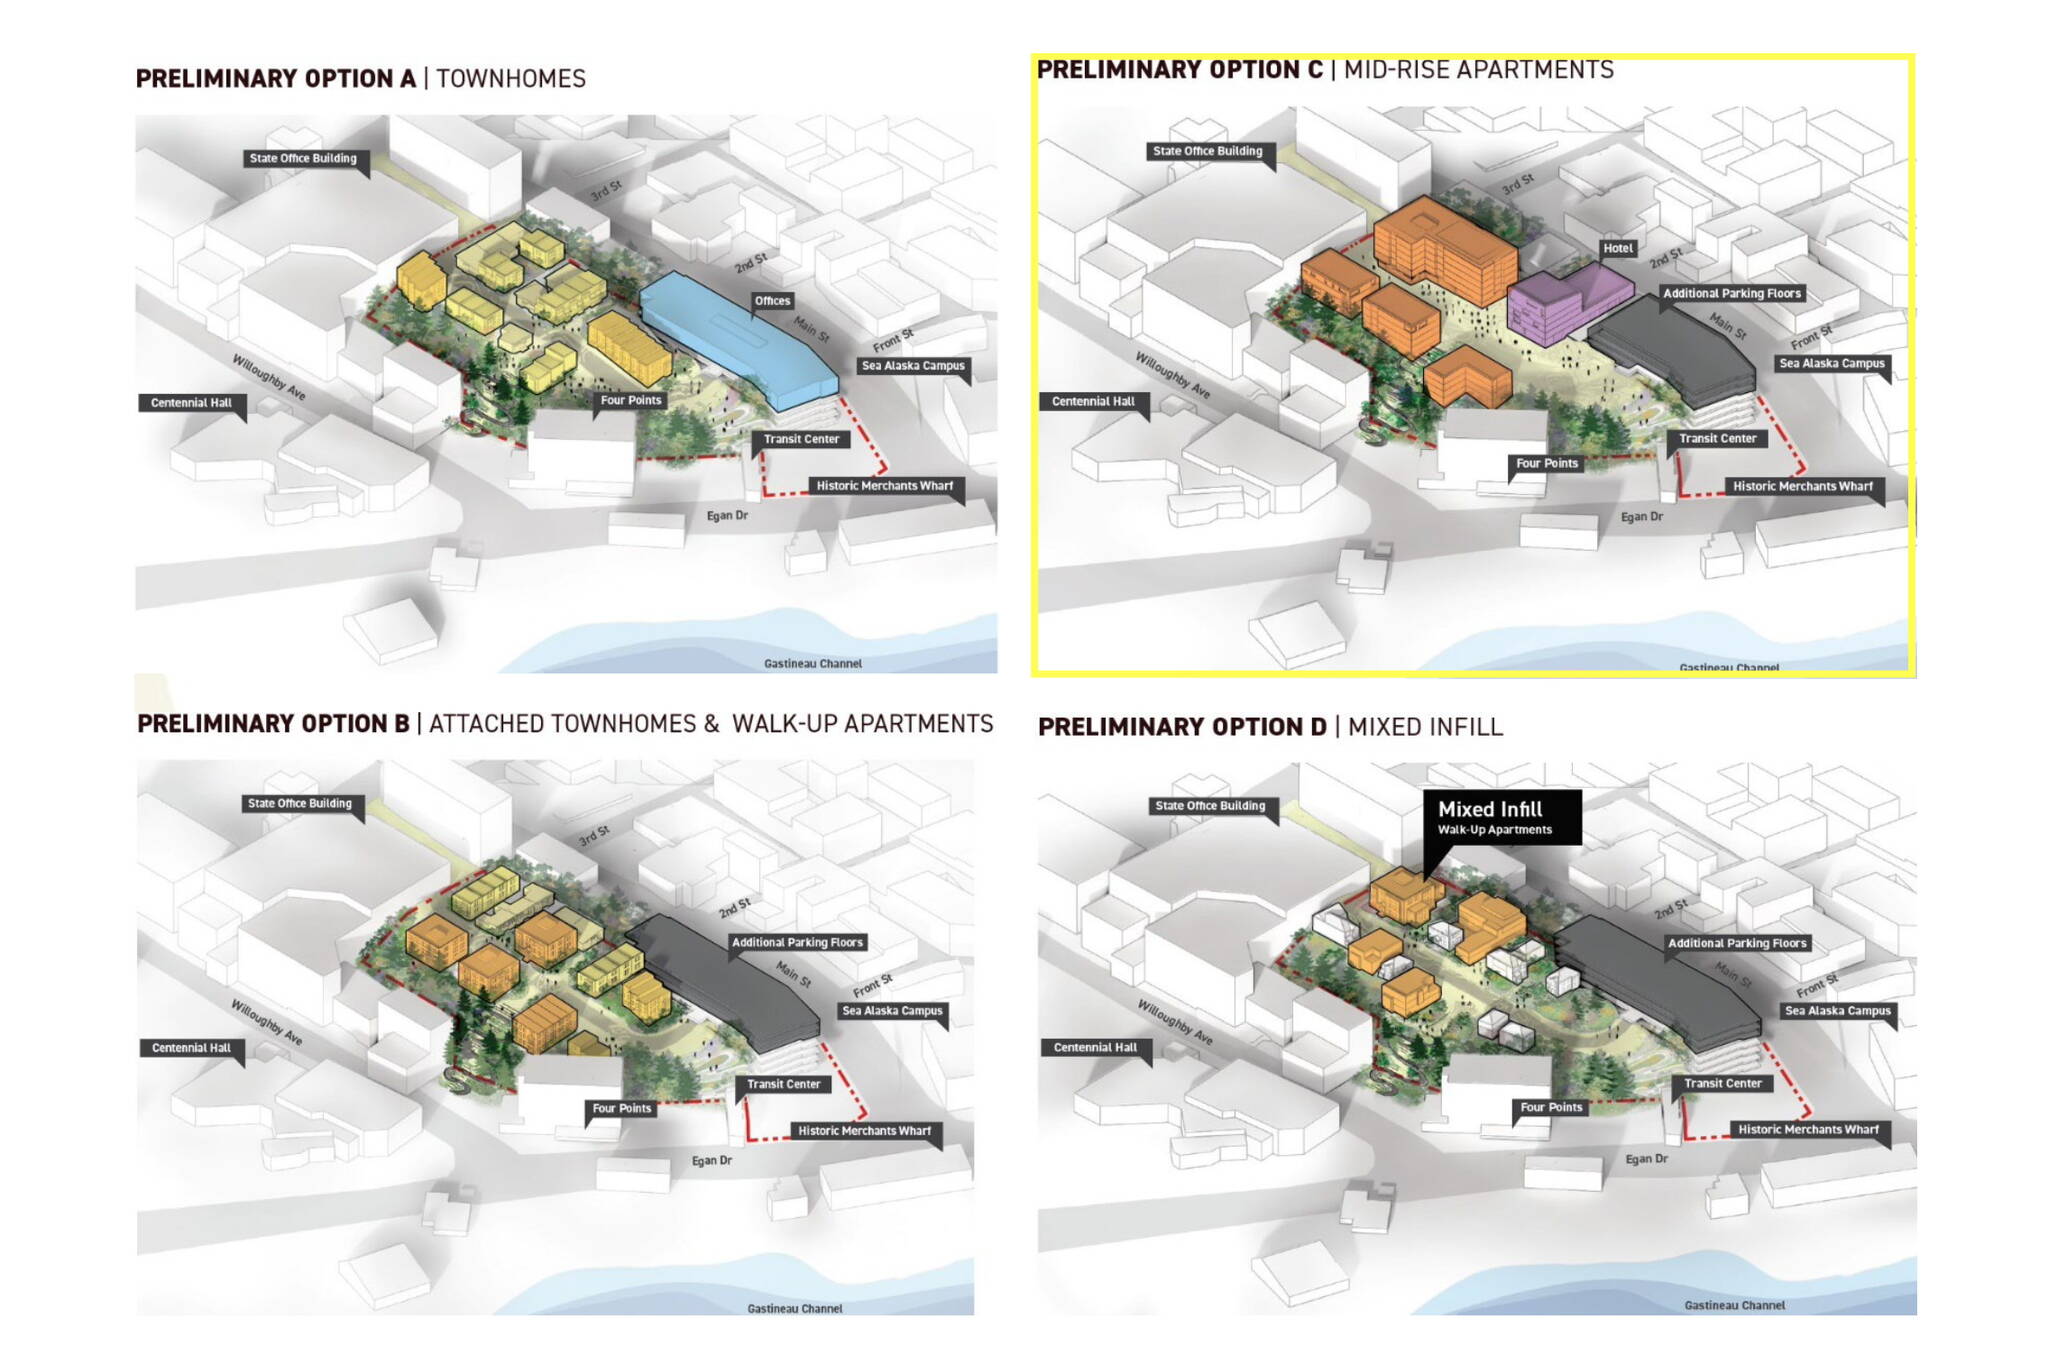 Illustrations of four preliminary development options for the Telephone Neighborhood are presented in a report that states the “mid-rise apartments” option (C), bordered in yellow, was narrowly favored in a survey among residents. A total of 29.76% of 1,865 people surveyed said they favored that option, compared to 29.06% of respondents favoring the “mixed infill” option (D), and 24.99% “attached townhomes and walk-up apartments” (B). (Images by the City and Borough of Juneau)